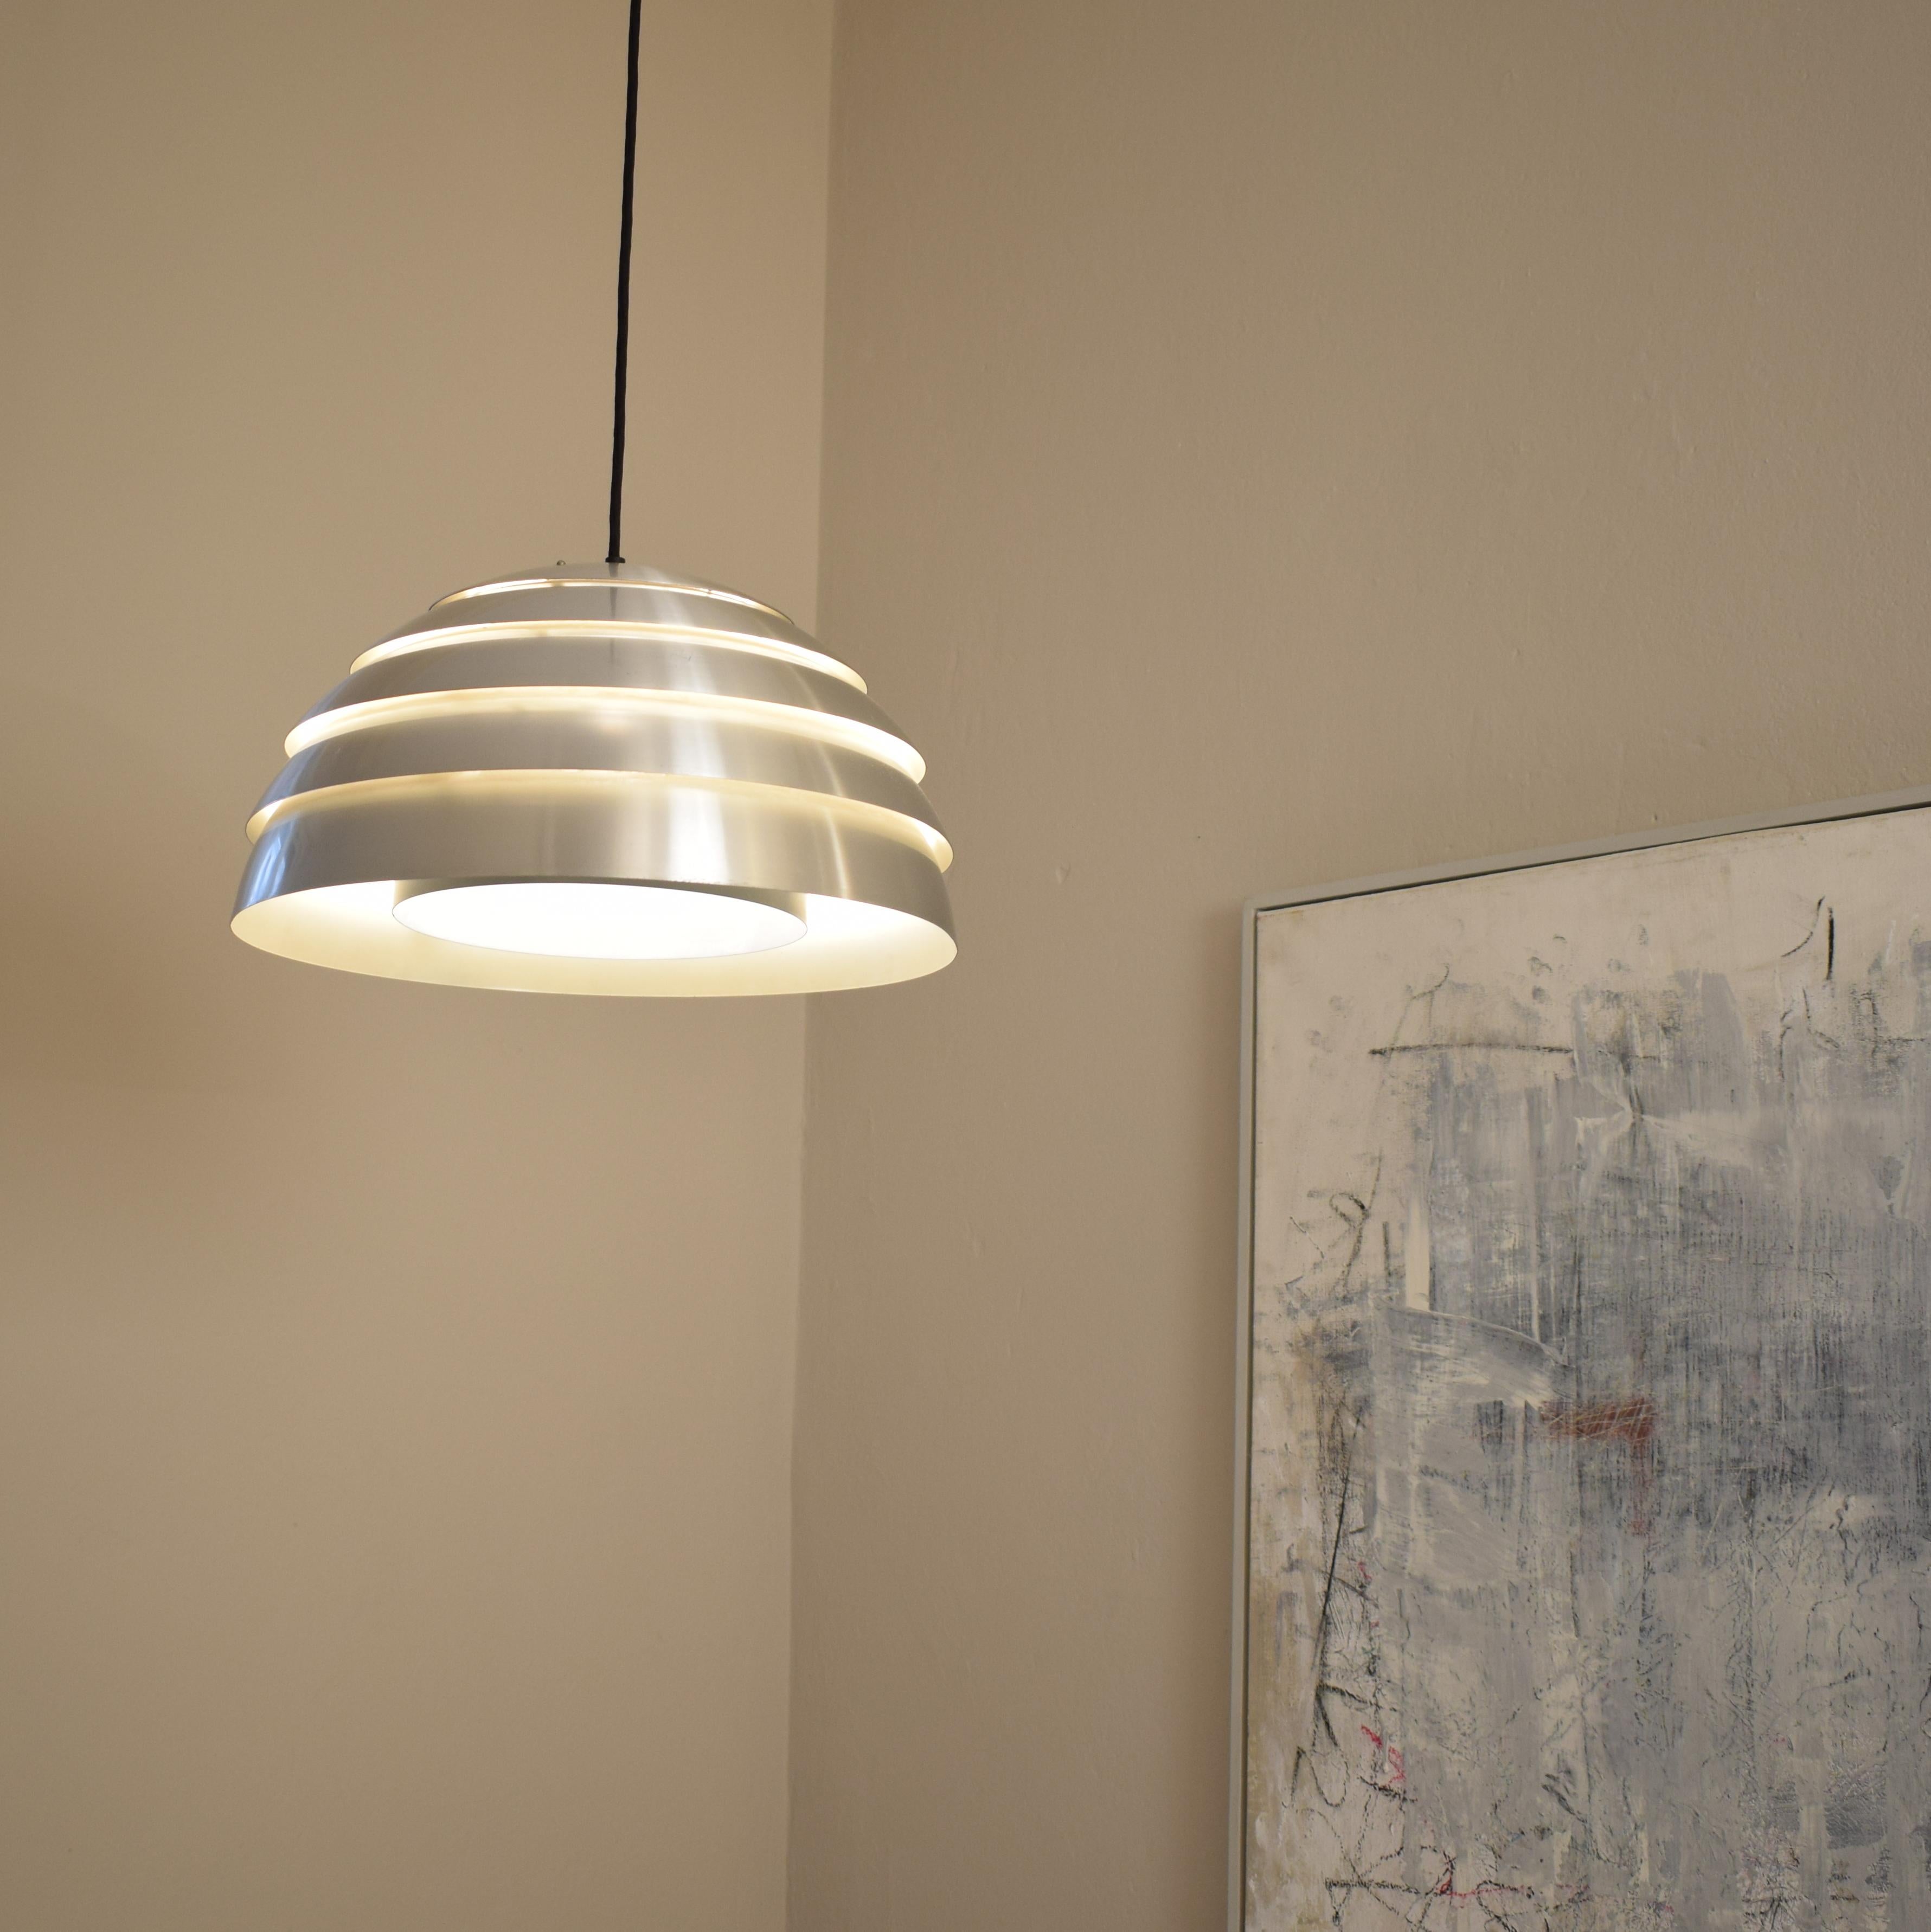 This beautiful midcentury Scandinavian / Swedish chrome pendant was designed by Hans-Agne Jakobsson for Markaryd in the 1960s.
The lamp has got a cable which you can adjust in height. At the moment it is 140cm long.
A unique piece which is a great